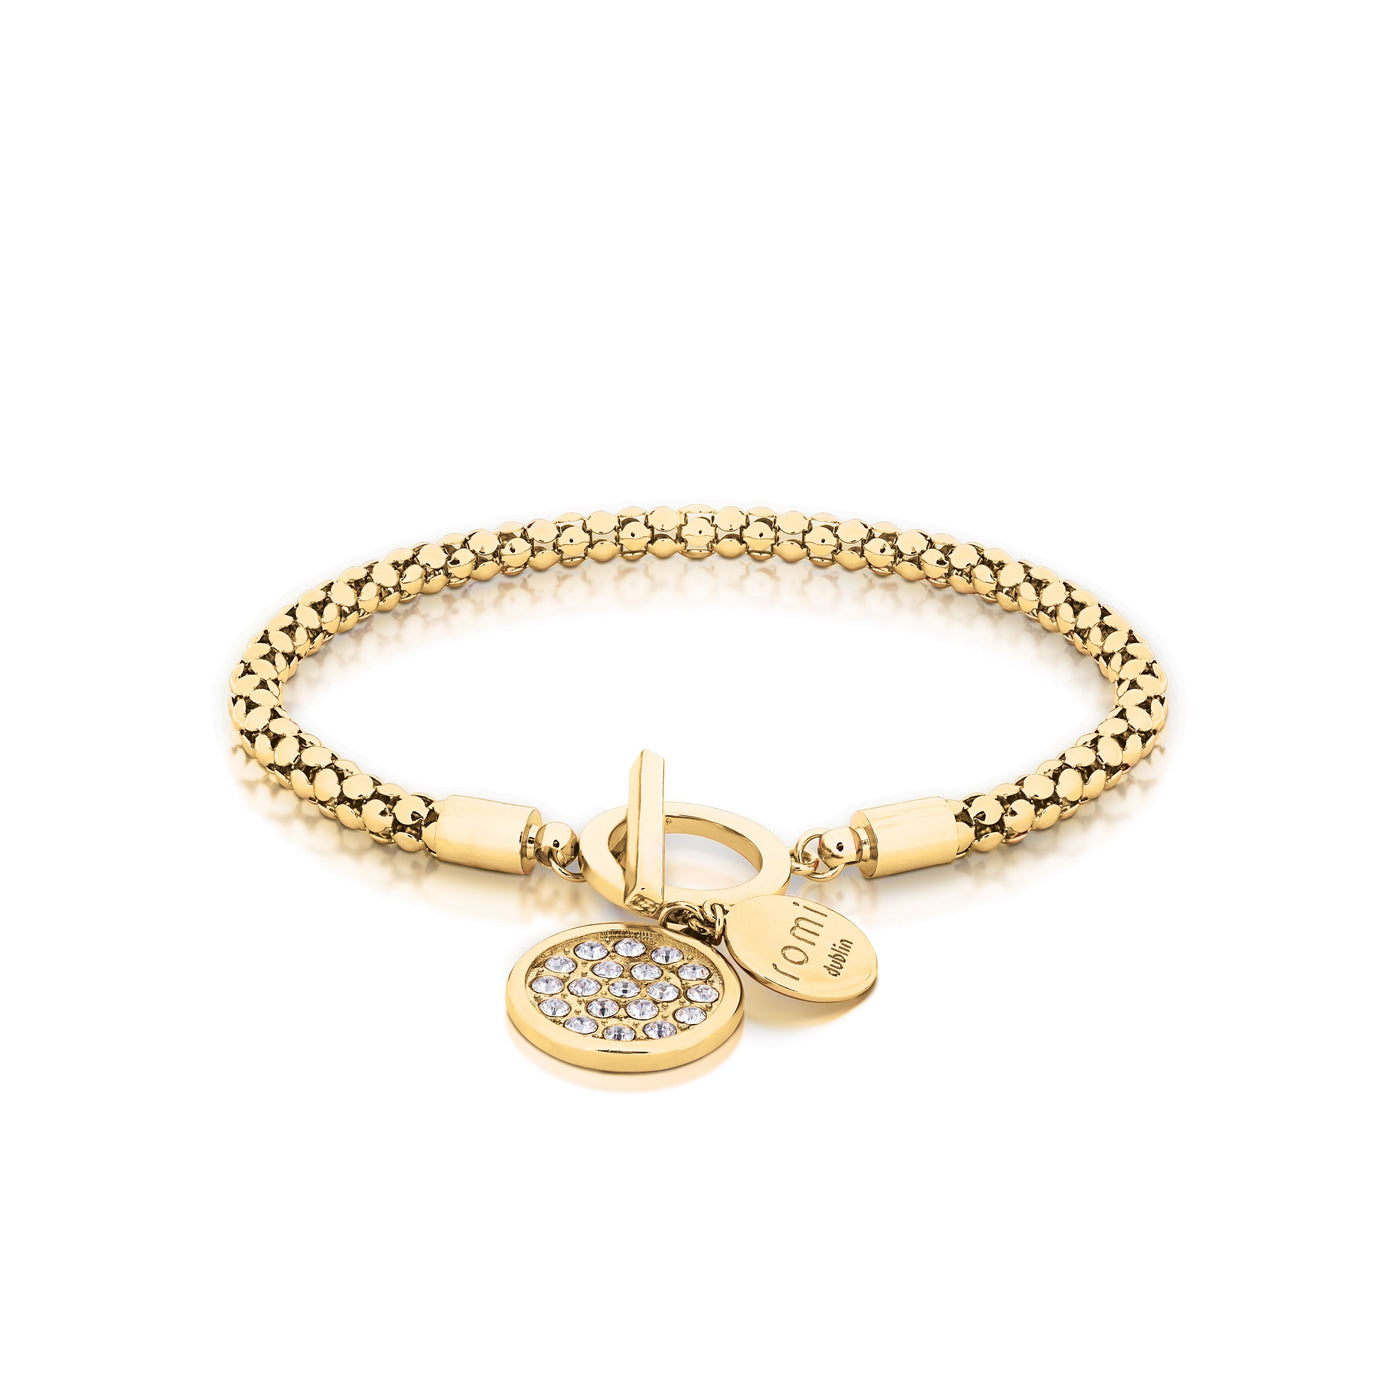 Romi Bracelet - Popcorn Chain with Pavé Charm  - Rose Gold Plated/Silver/Gold